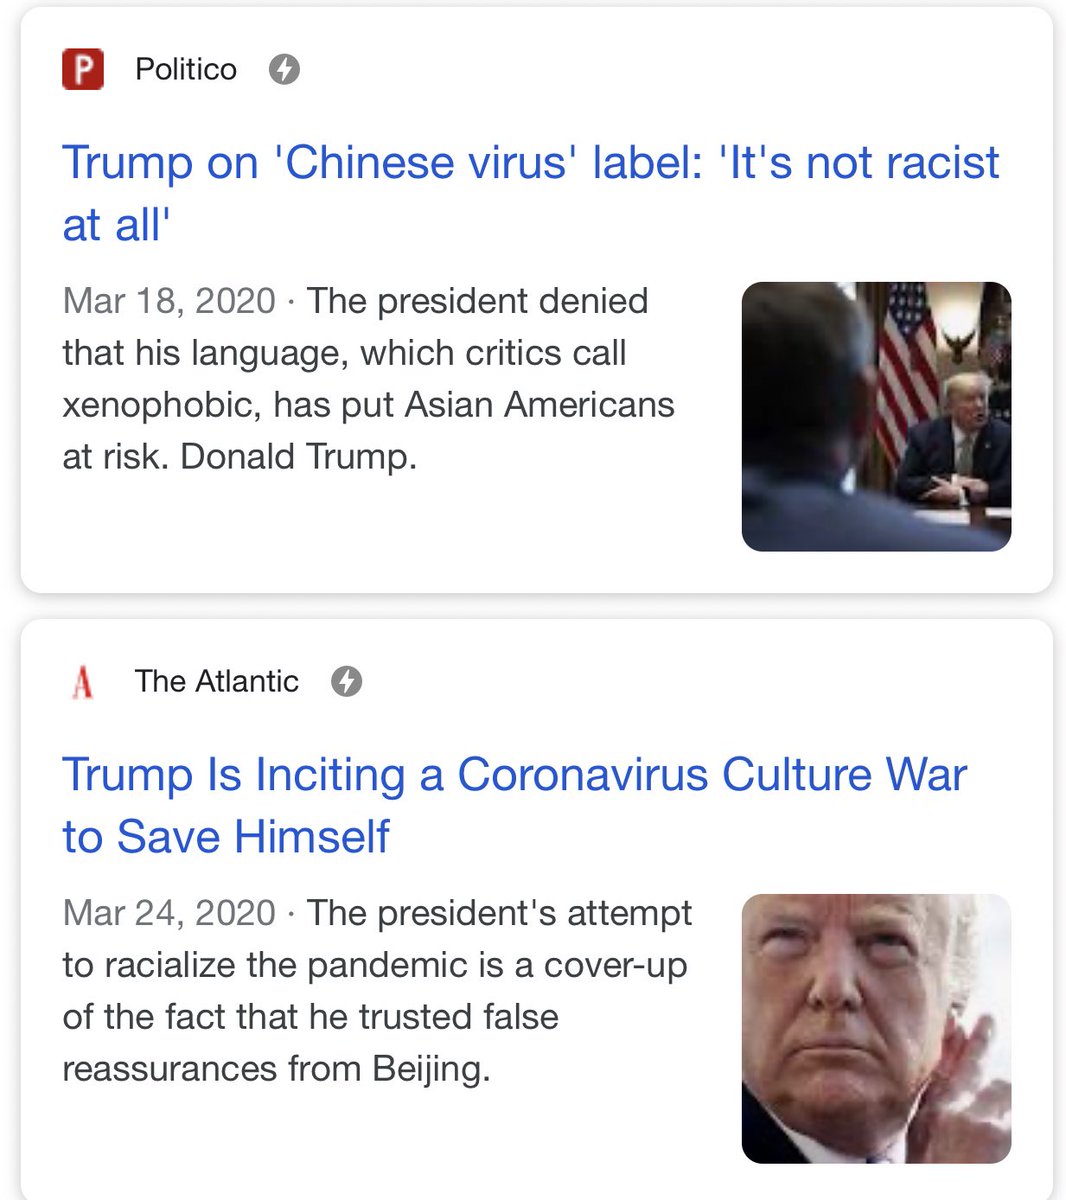 And just in case anyone wants to try to claim that Breitbart/Trumpworld are being sincere, take a look at how they’re talking about coronavirus. Breitbart has an entire section of articles labeled “Wuhan virus”, and Trump has a new derogatory nickname for the virus every week.